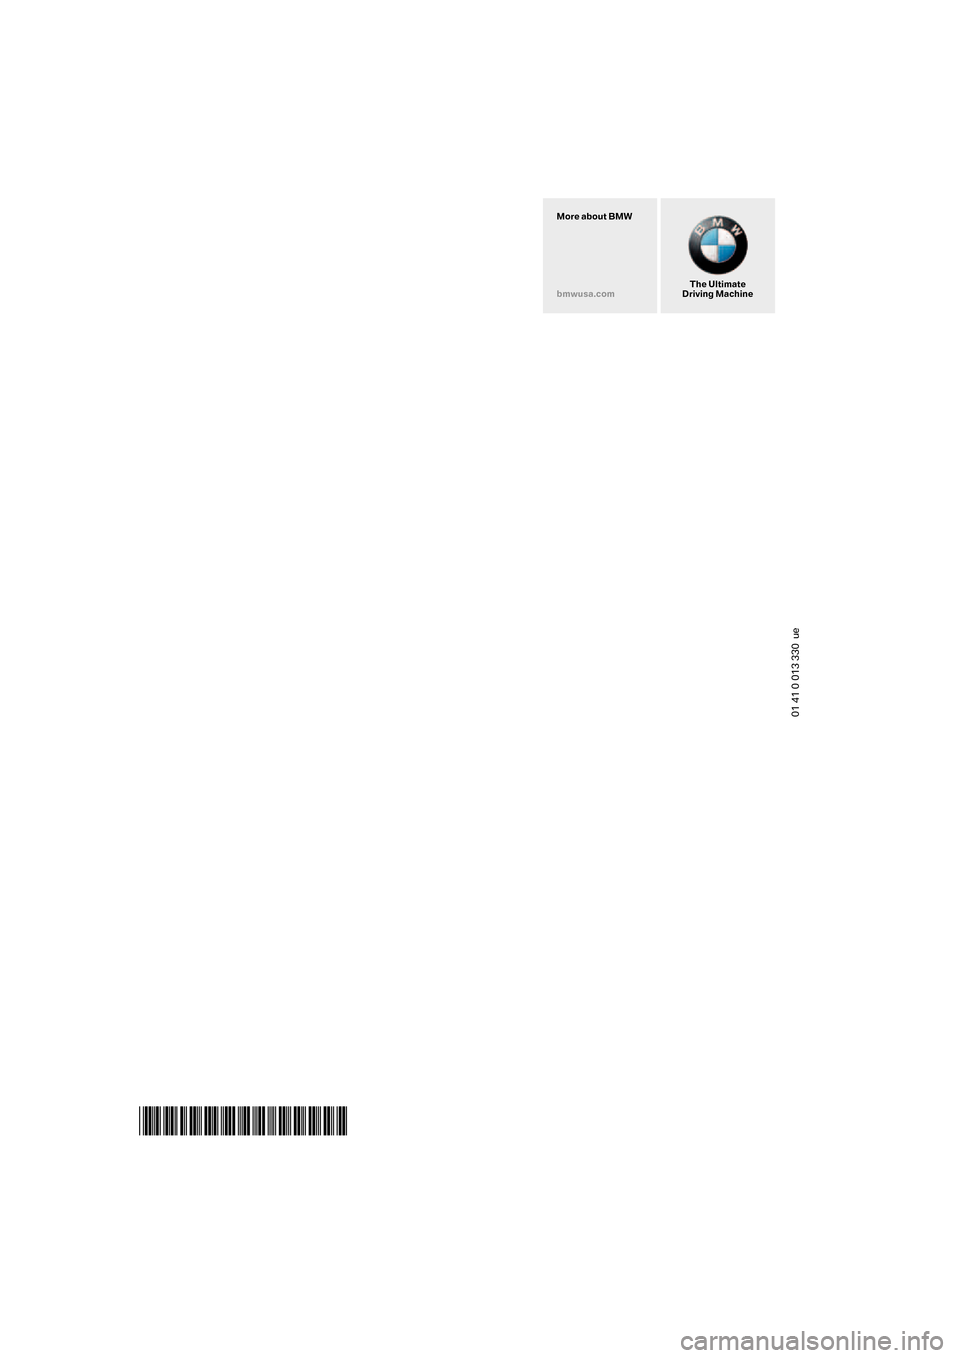 BMW Z4M ROADSTER 2007 E85 Service Manual 01 41 0 013 330  ue
*BL0013330000*
The Ultimate
Driving Machine More about BMW
bmwusa.com
ba5.book  Seite 48  Mittwoch, 28. Februar 2007  1:09 13 